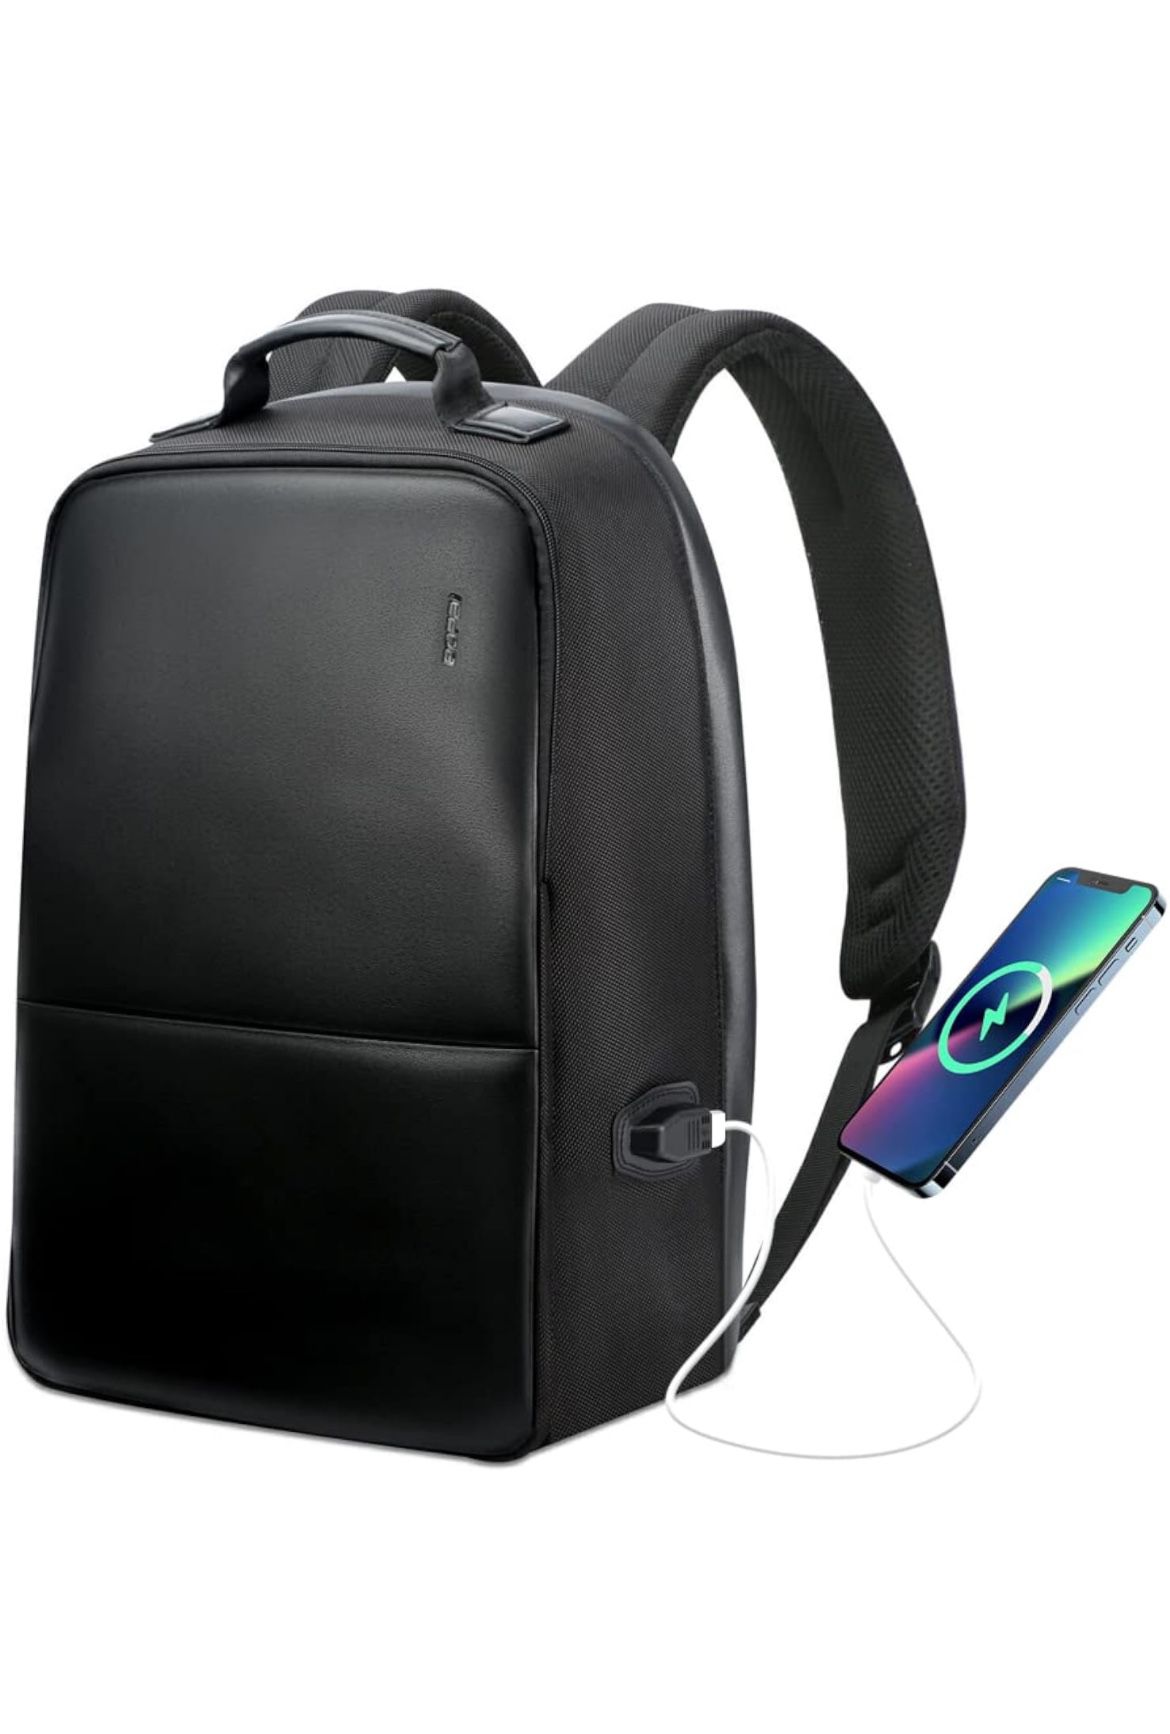 BOPAI 15.6-Inch Anti-Theft Laptop Backpack with USB Charging Port and Anti-Glare Function - Water-Resistant, Lightweight